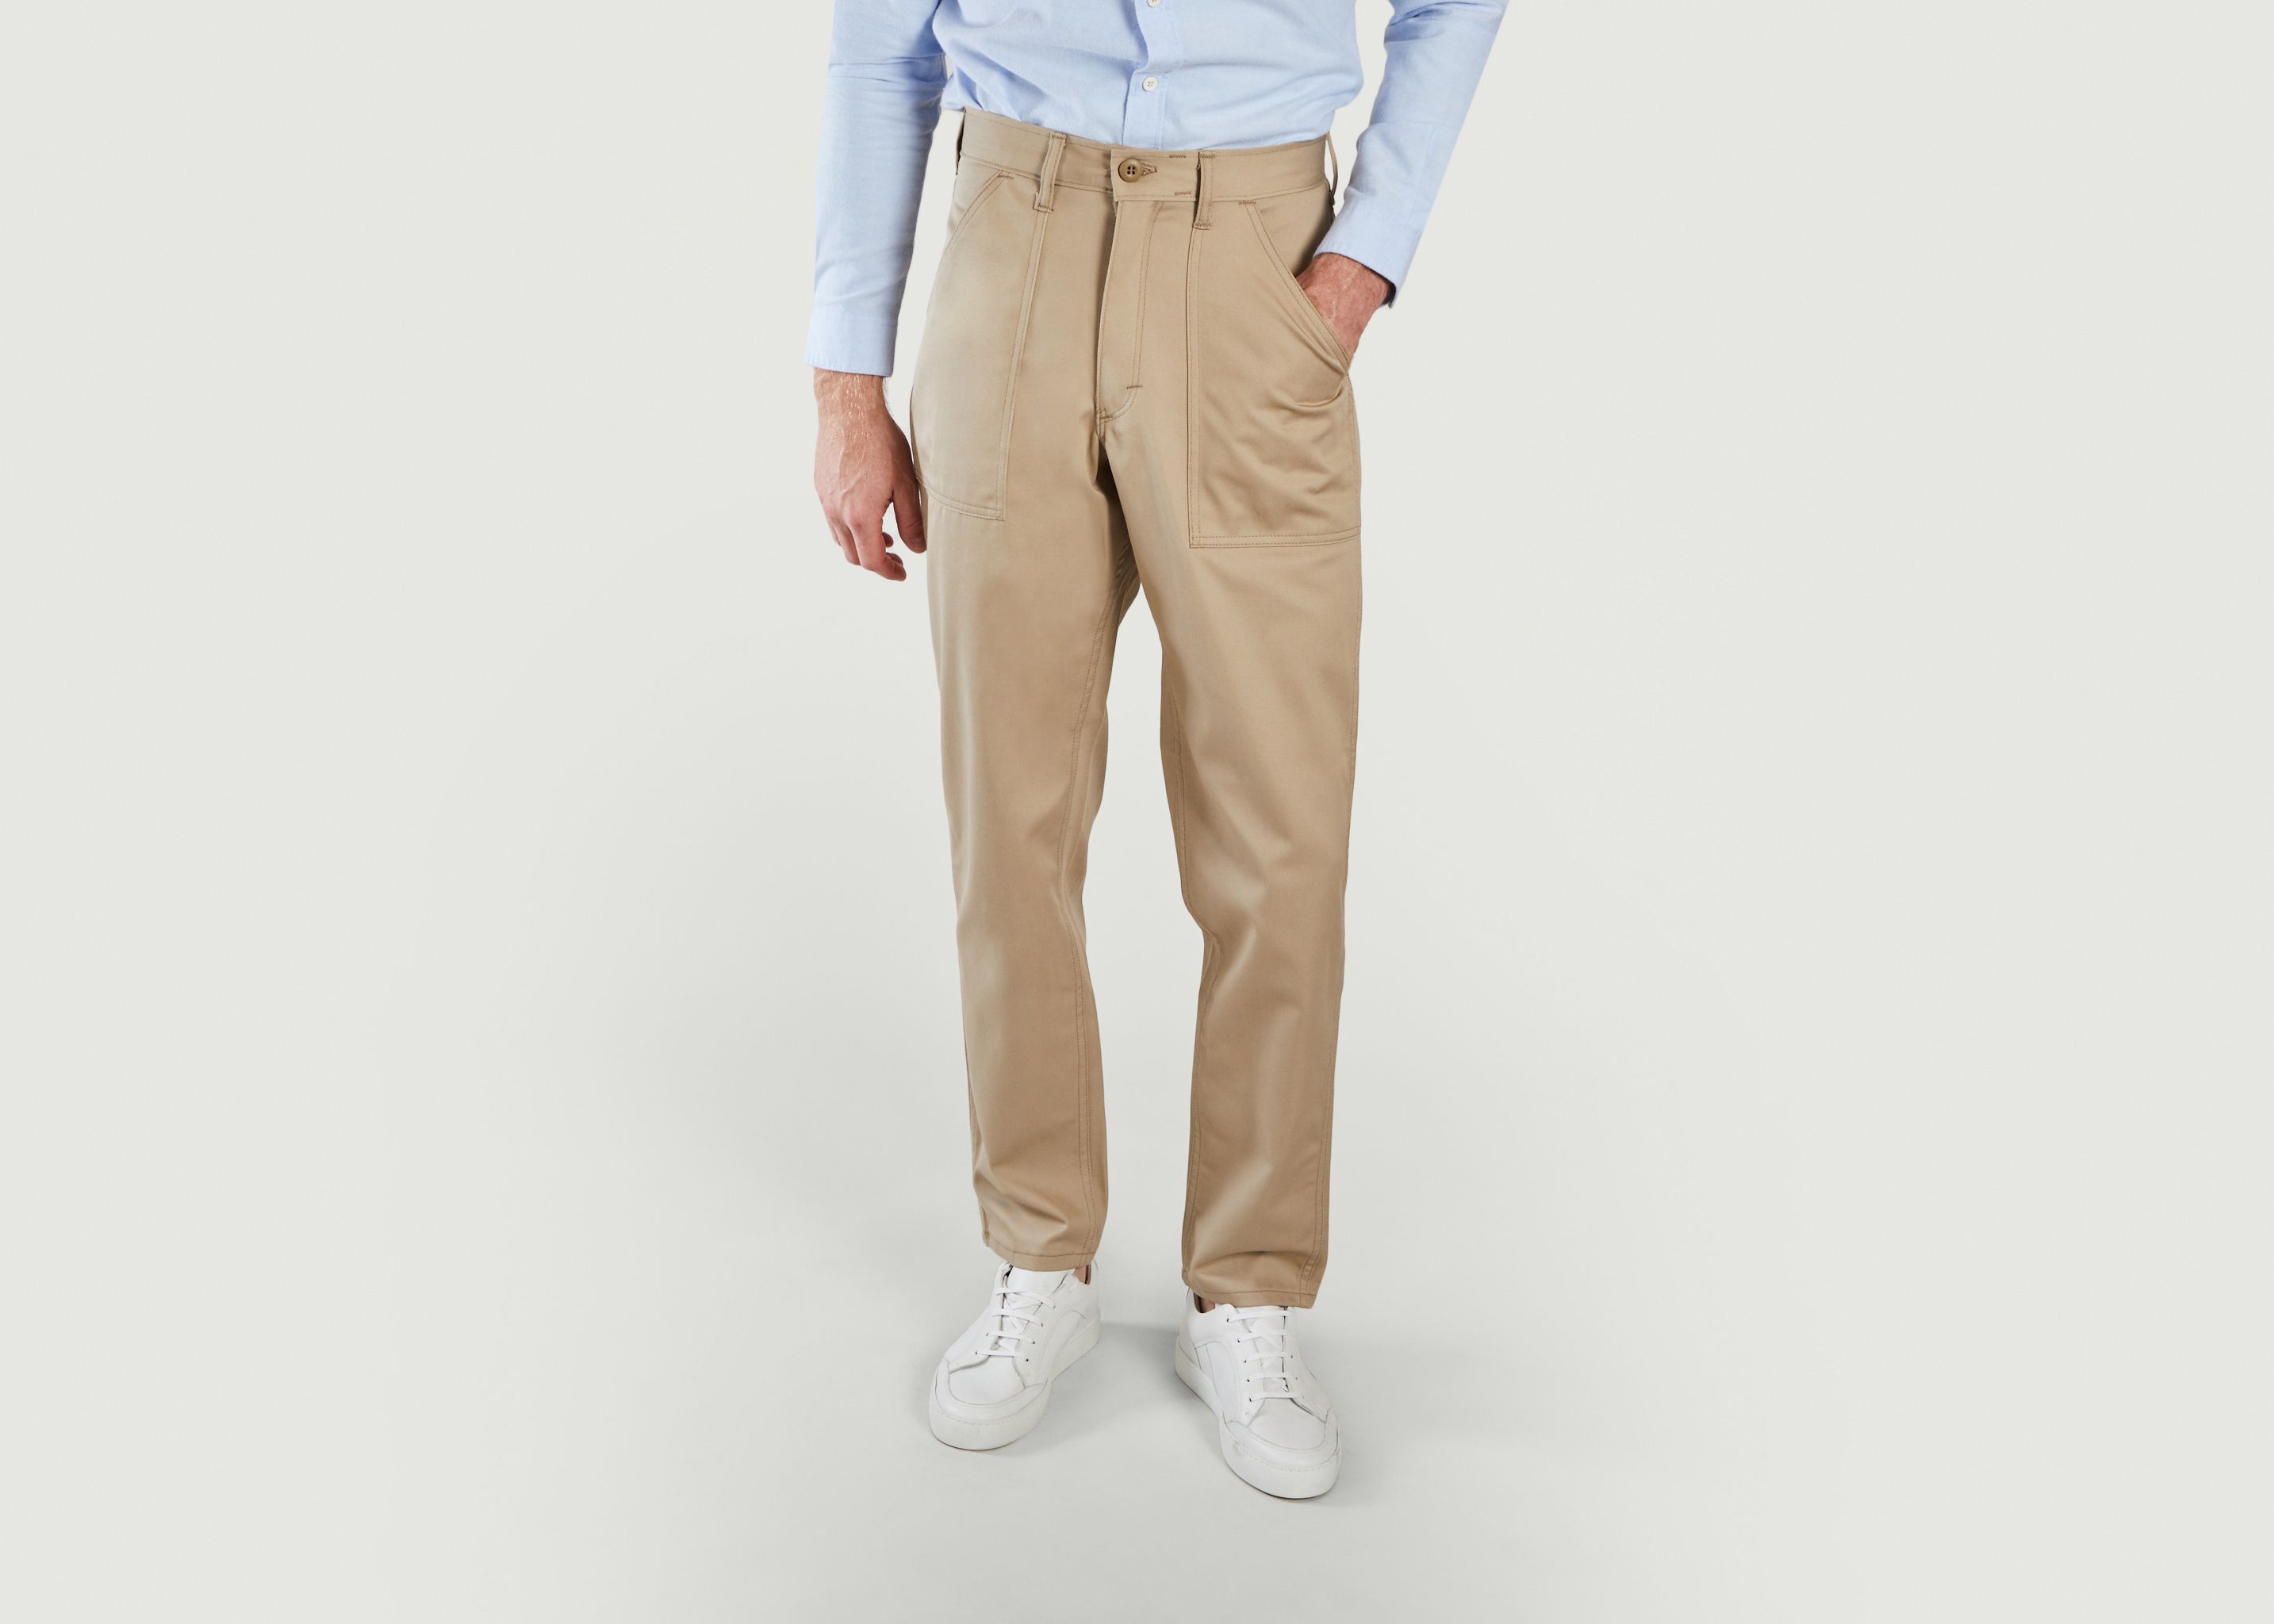 Tapered Fatigue pants - Stan Ray